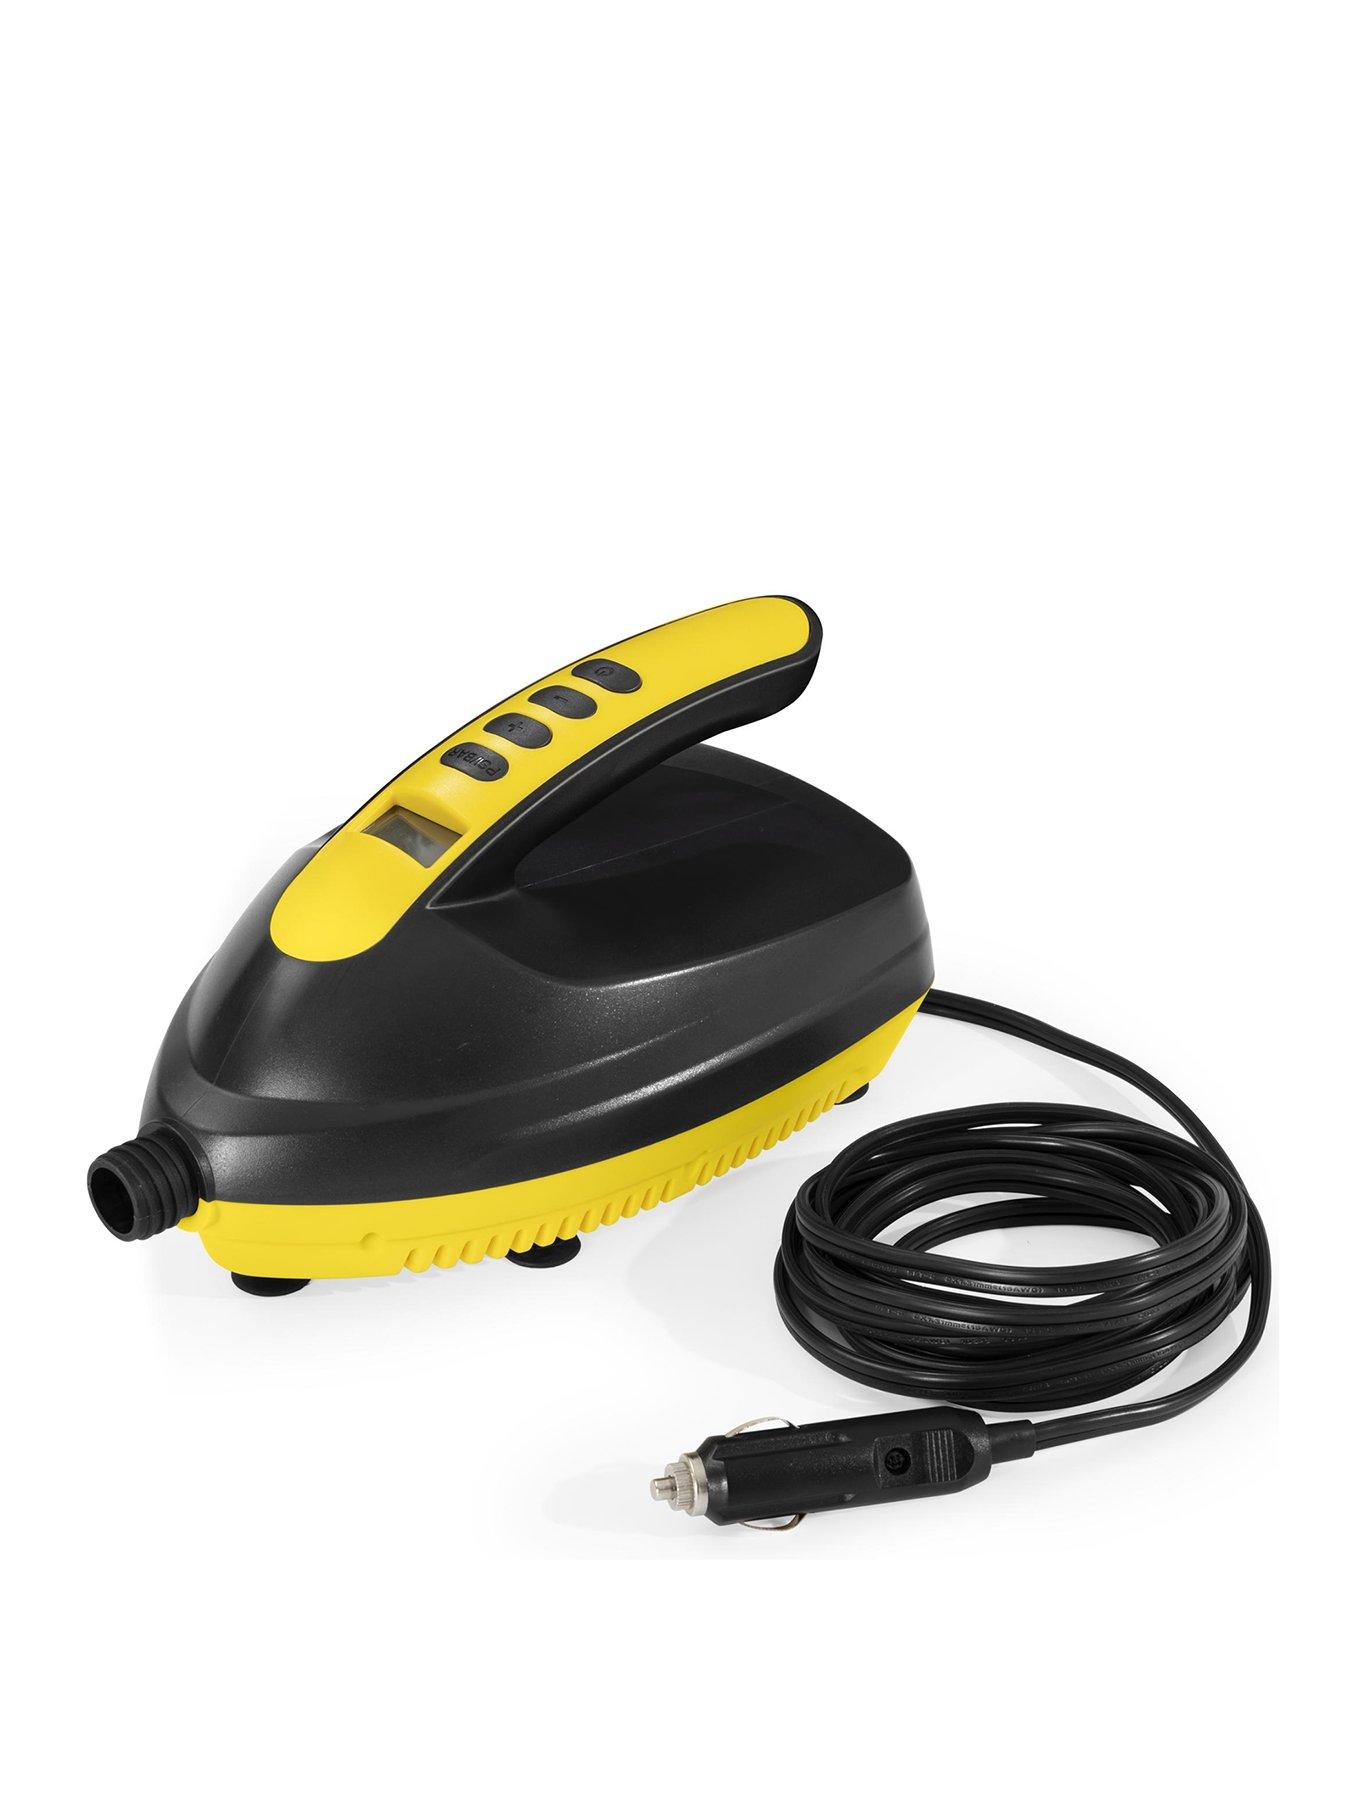 Buy SUP pump electric 12V > Advice > Stand-up Paddler SUP Shop